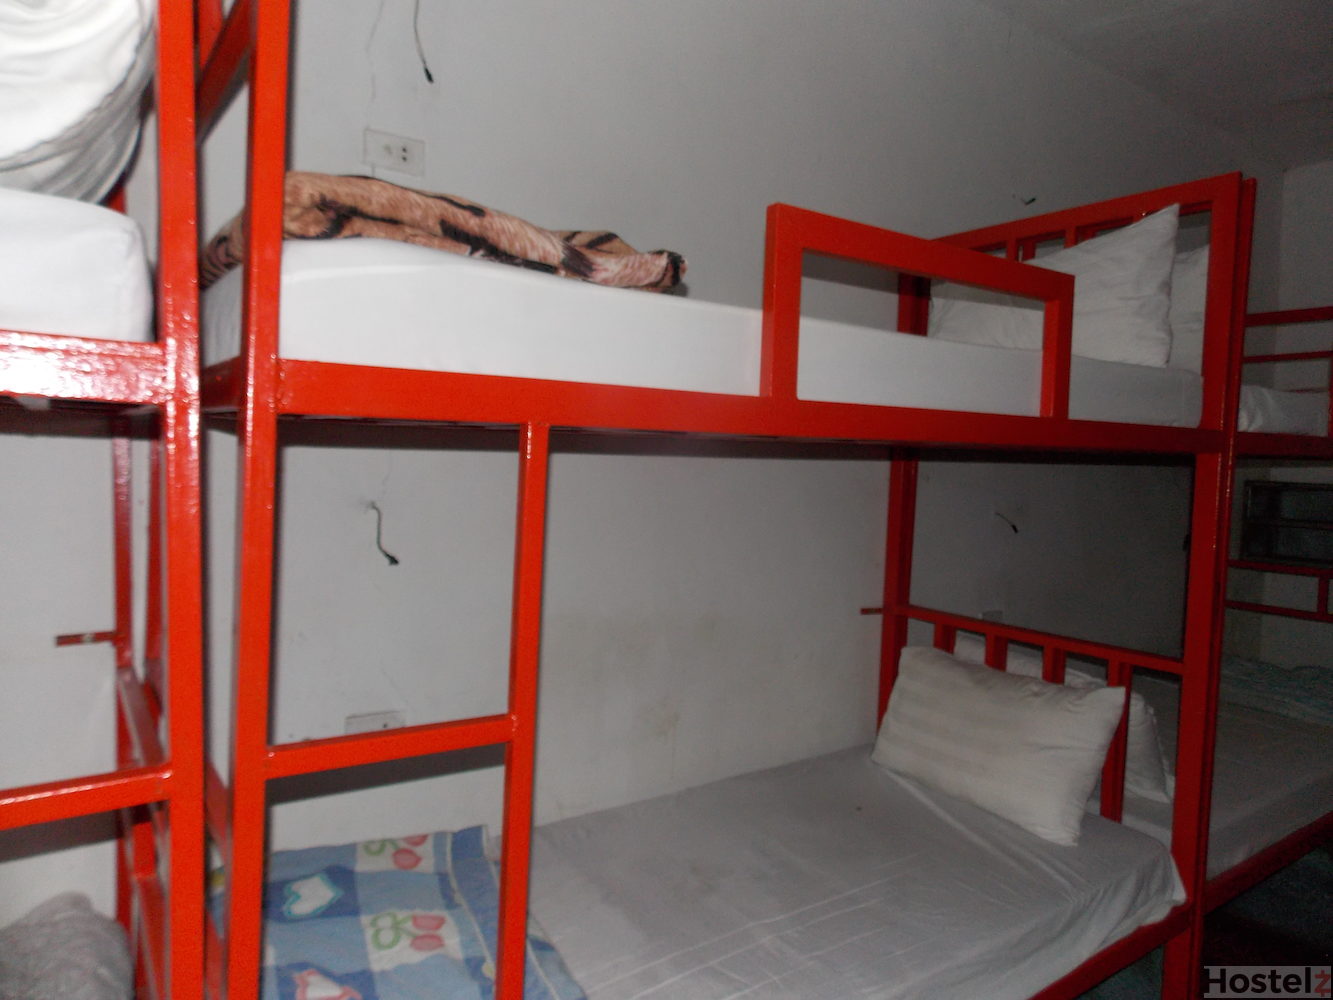 Chillao Youth Hostel, Vang Vieng